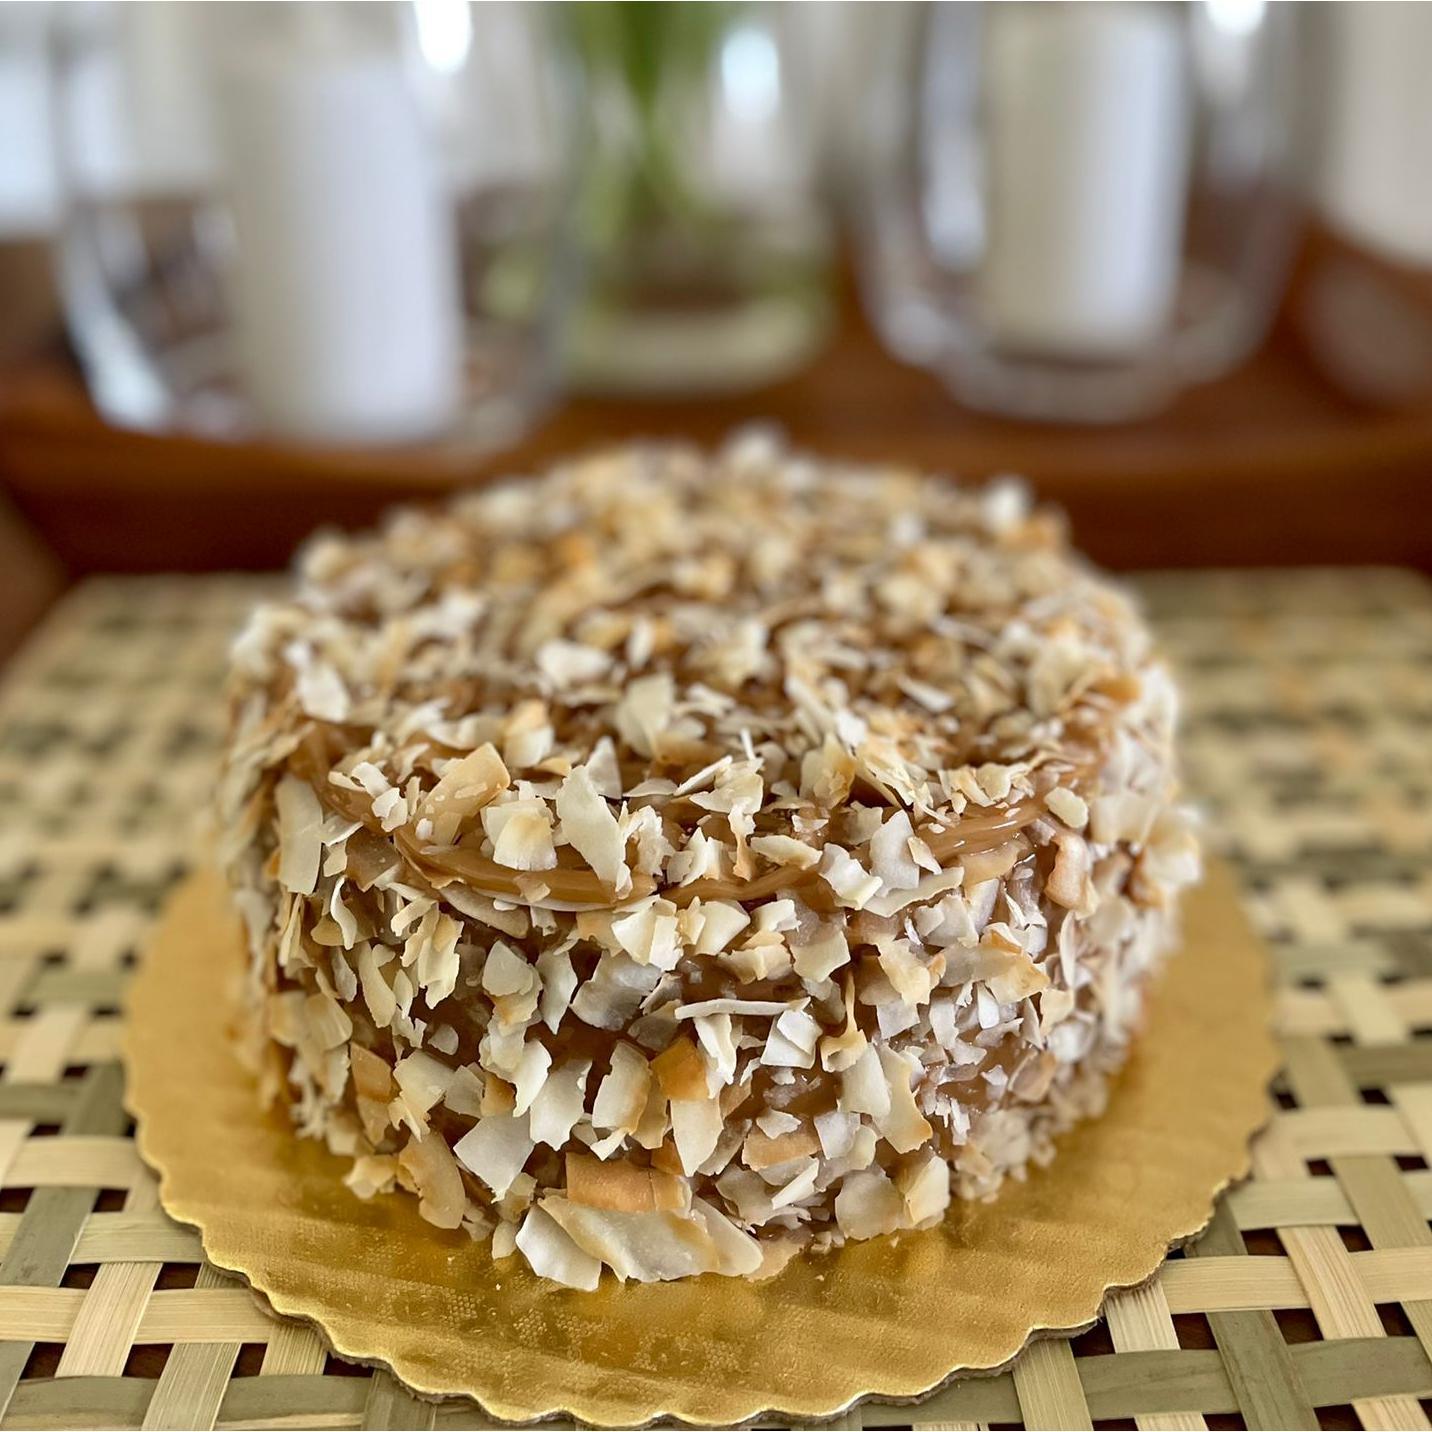 Gluten-free, sugar-free, dairy-free Coconut Full Life Cake topped with sugar-free caramel syrup and golden brown toasted coconut flakes, offering a taste of tropical indulgence.Full Life Gourmet Bakery